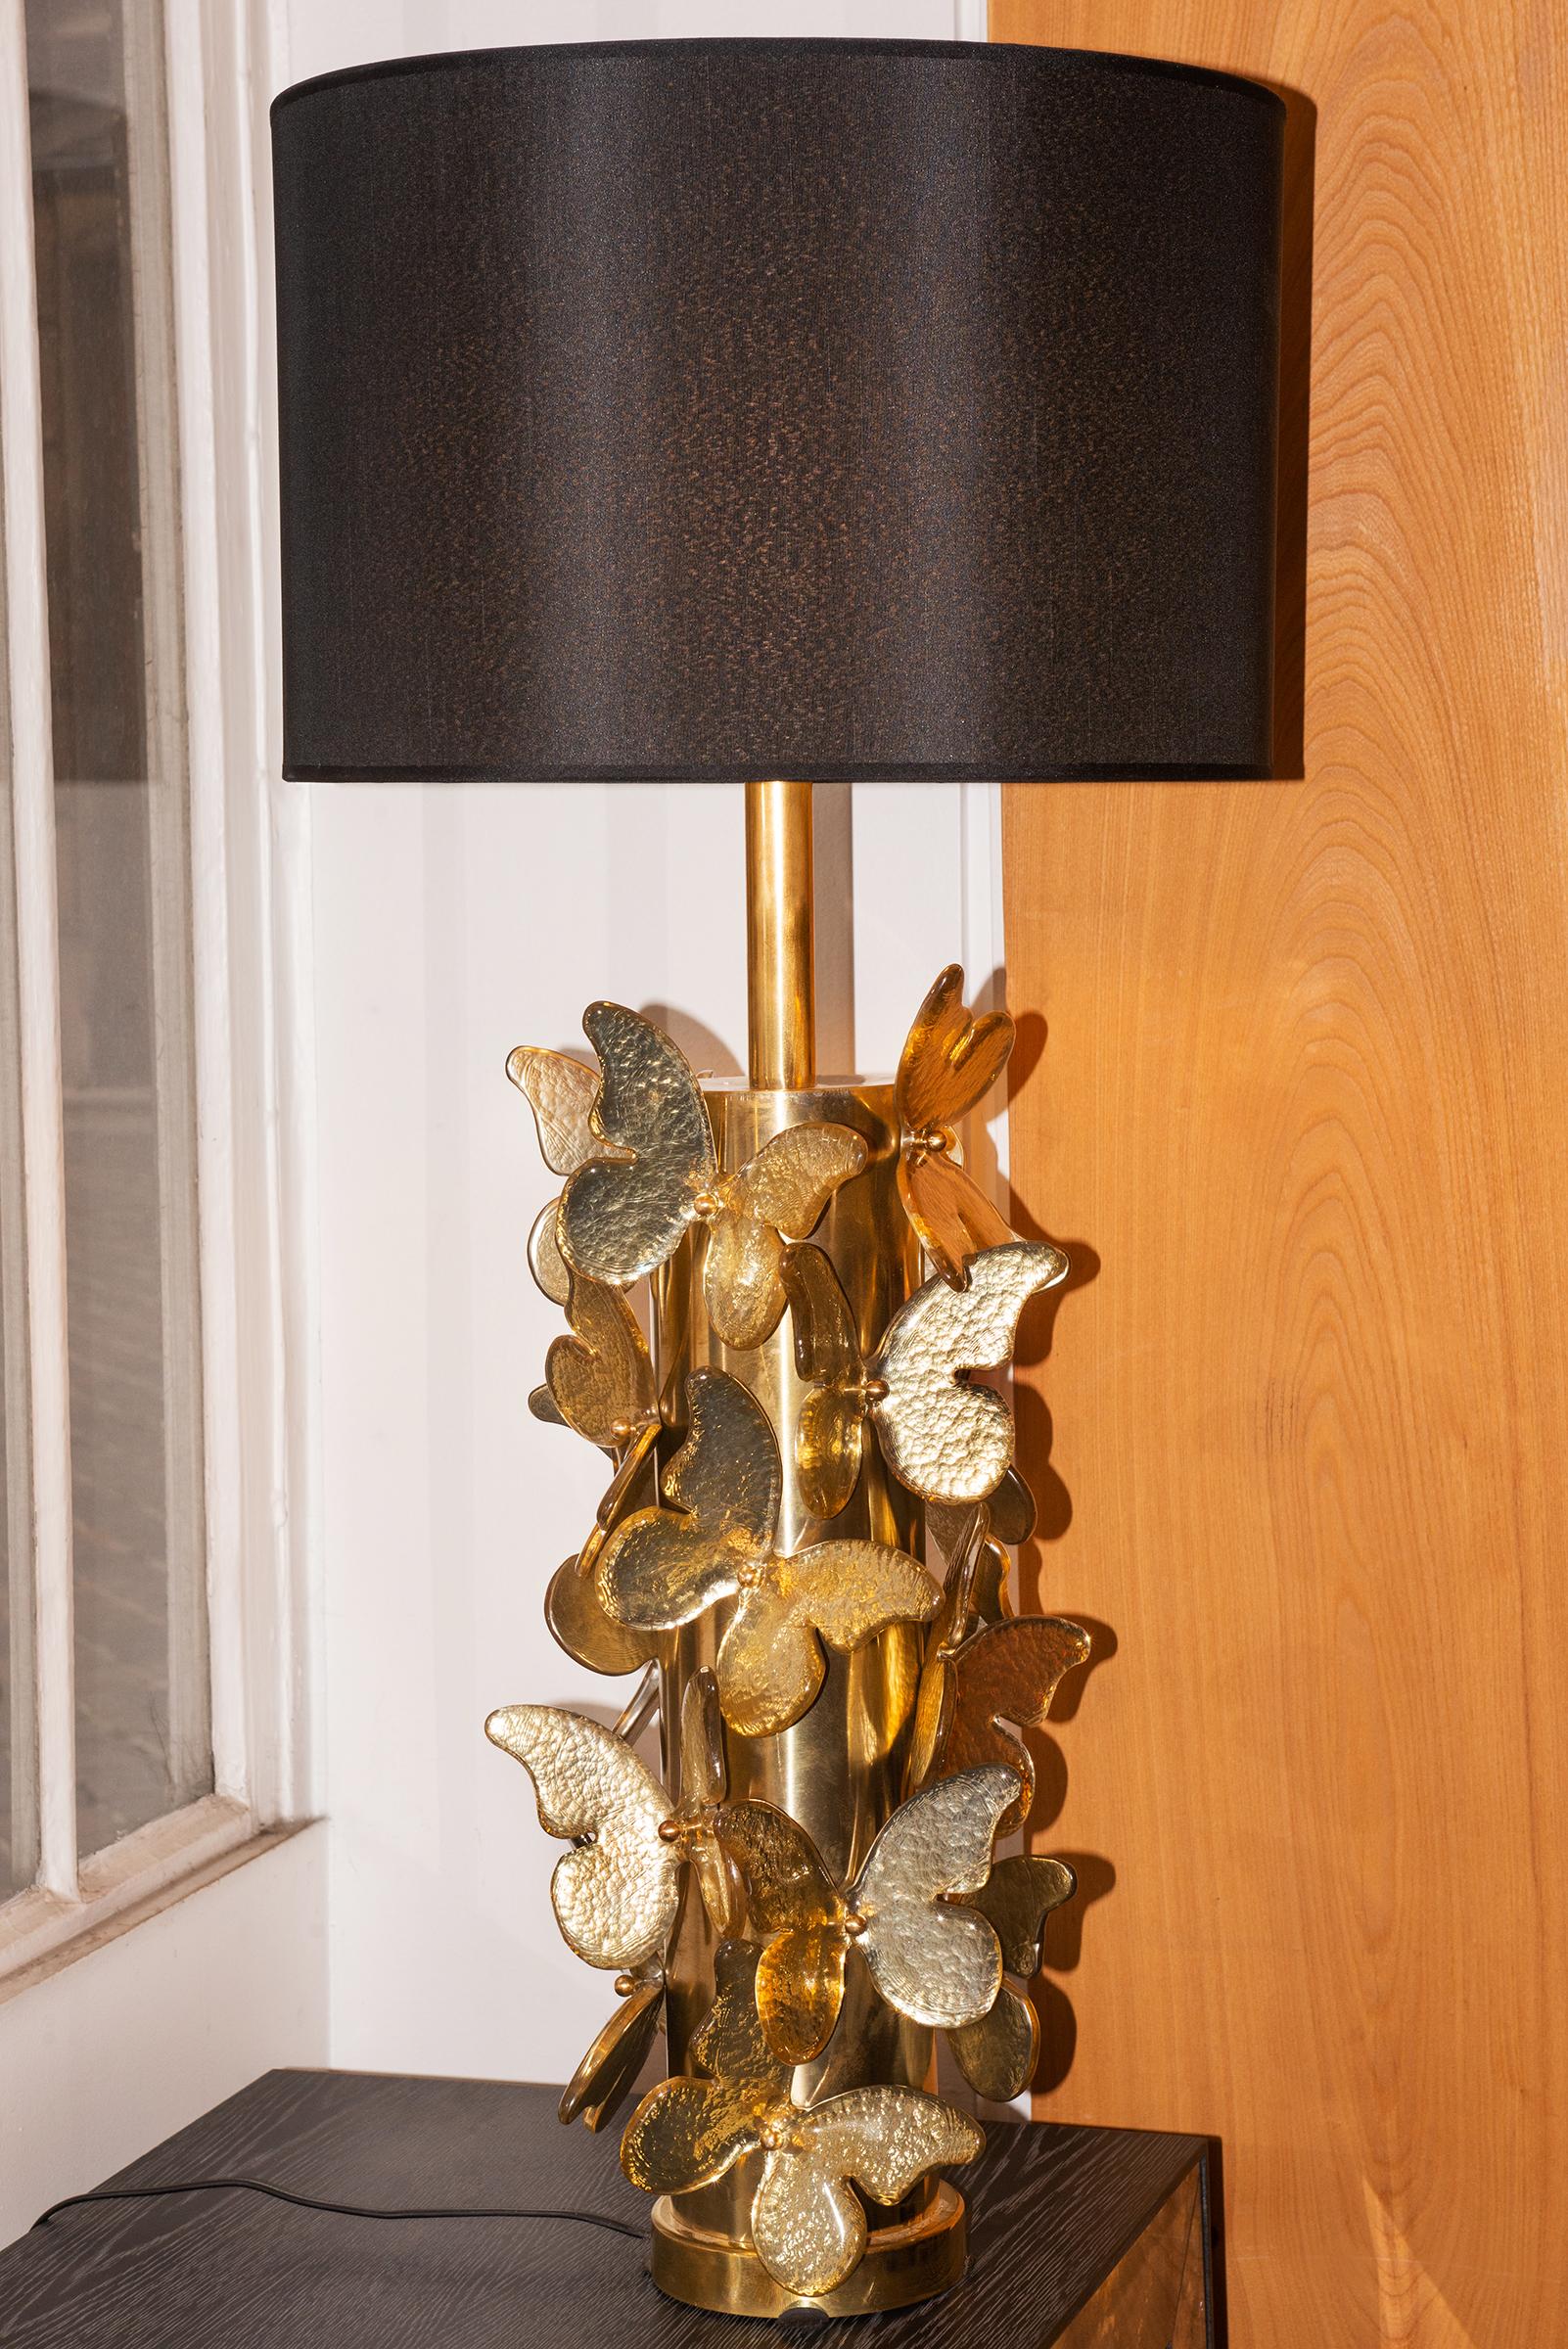 Table Lamp Gold Murano Butterflies with polished
brushed brass base table lamp ornamented with murano
glass butterflies with gold leaf taken under the murano glass.
With black lamp shade included: Diameter 43cm.
Table lamp base: Diameter 27cm,